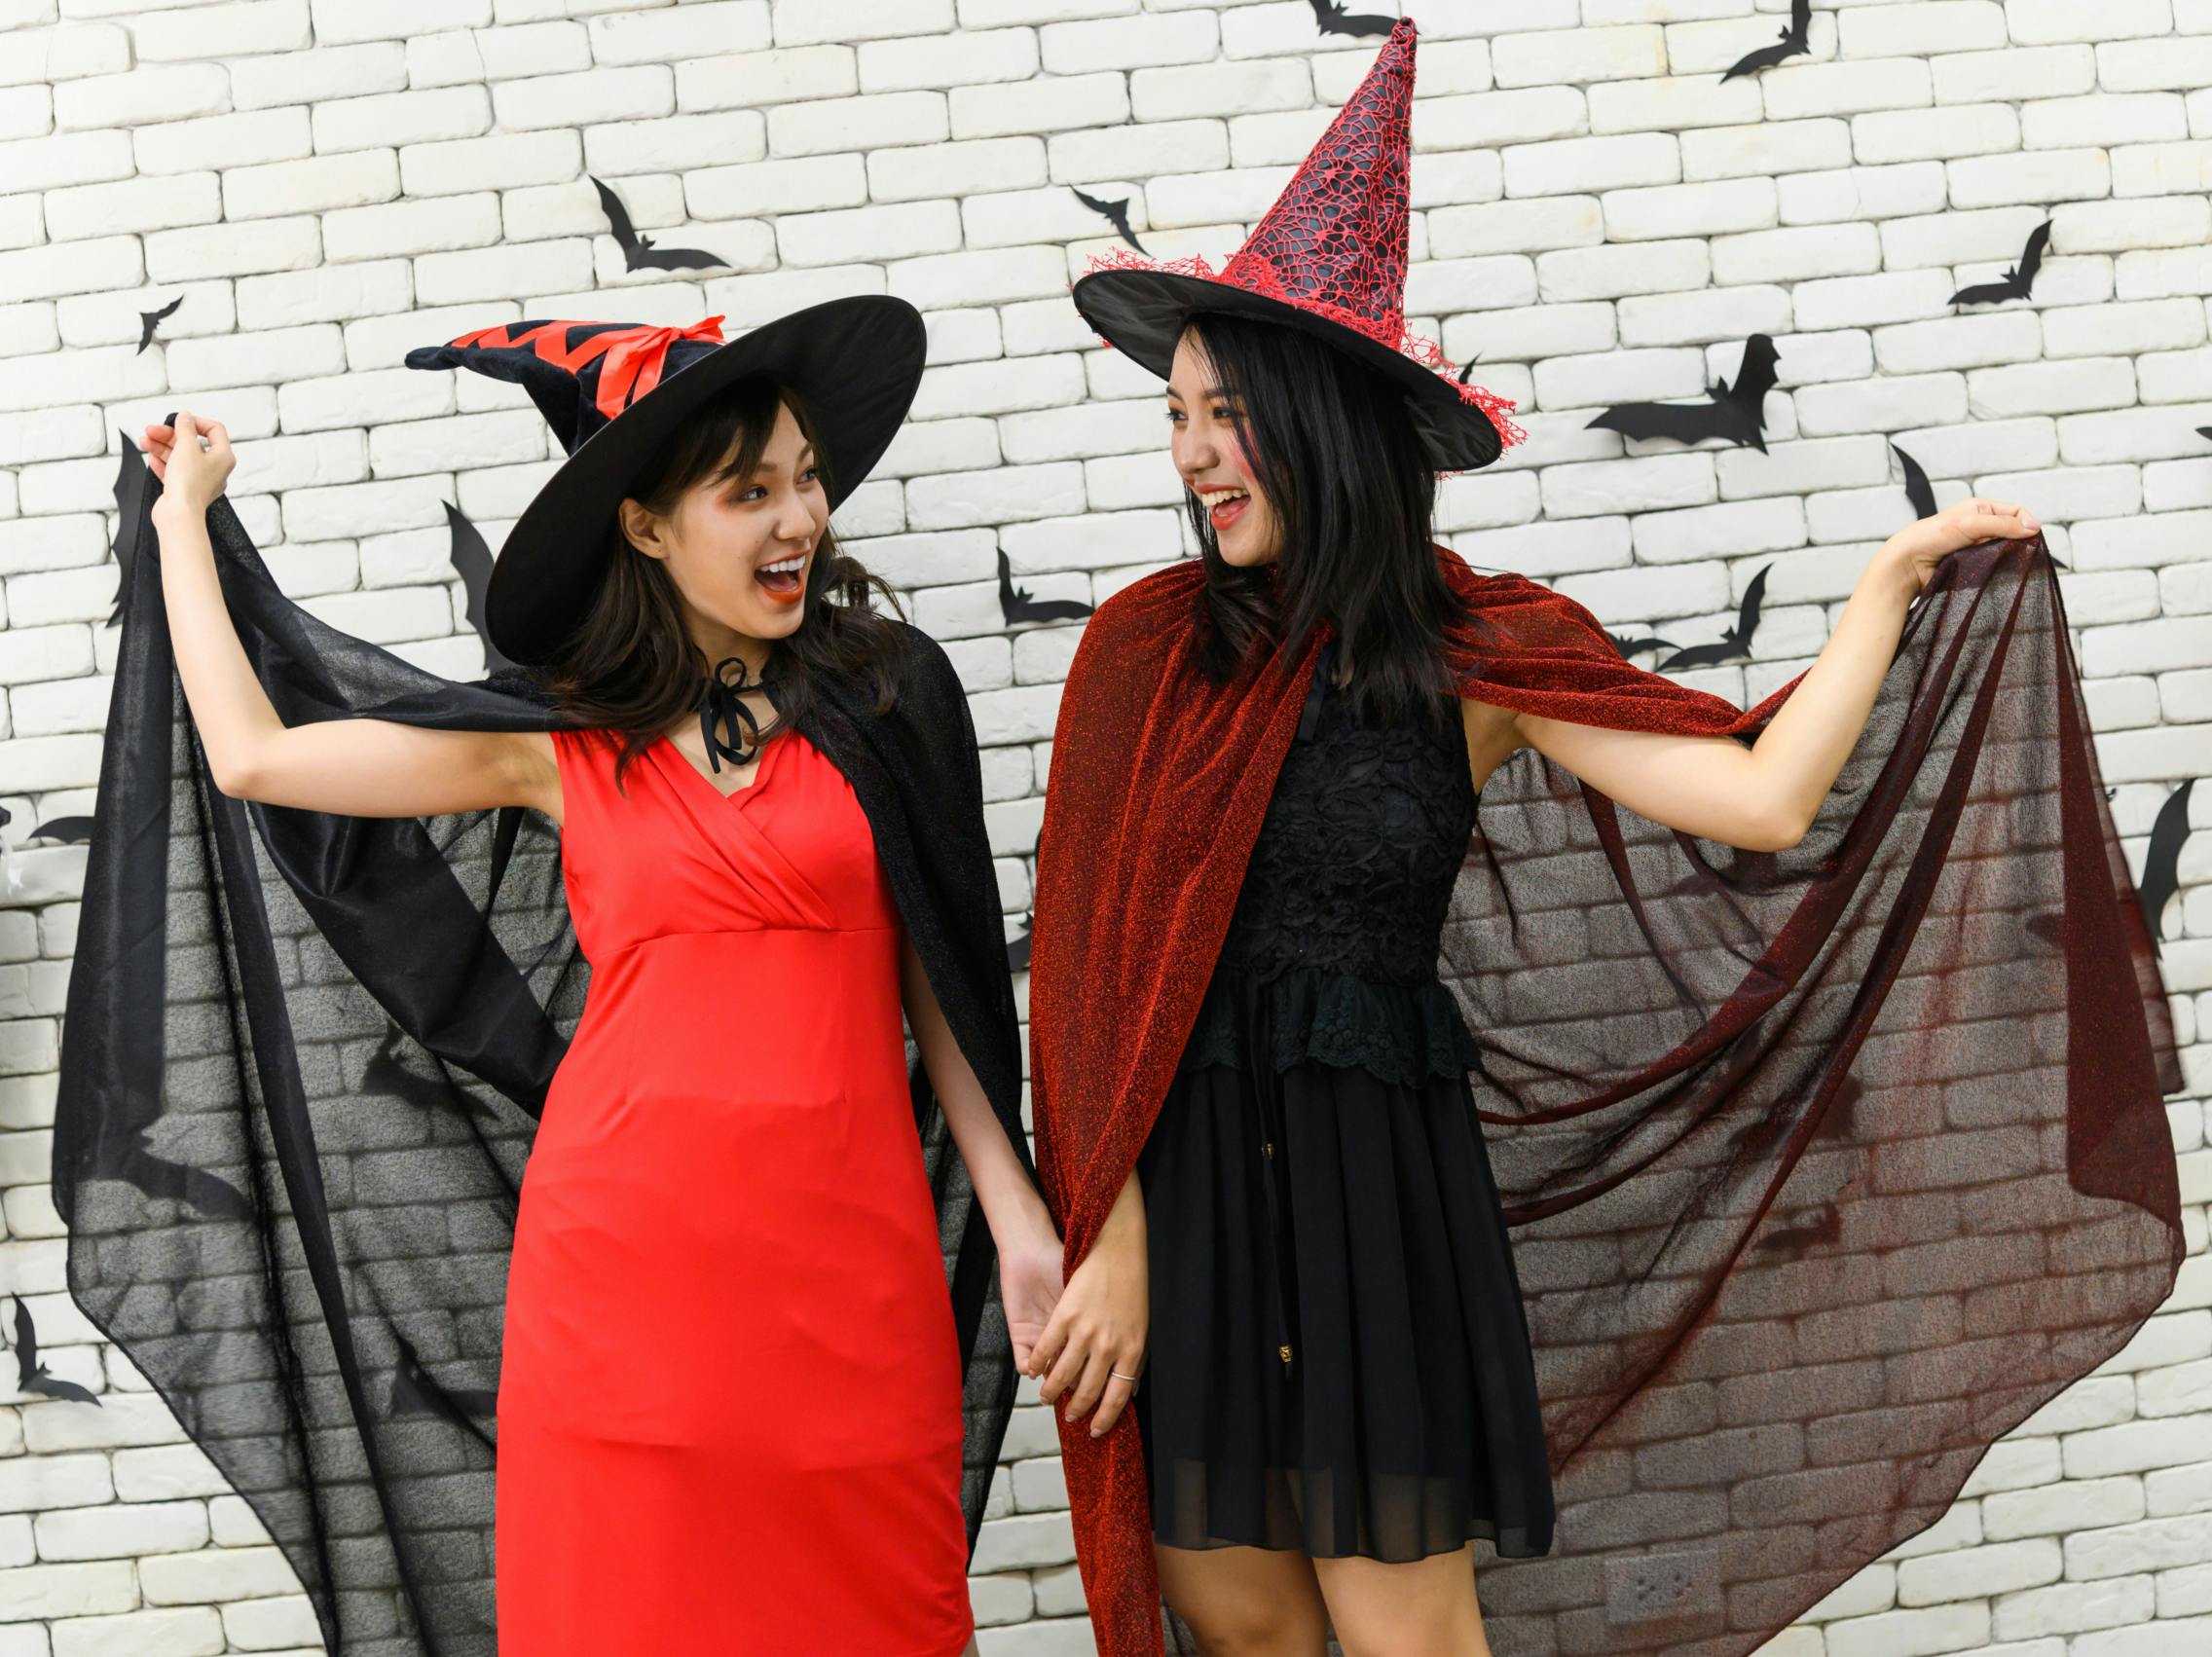 Two women dressed as witches smiling at each other in front of a white brick wall.